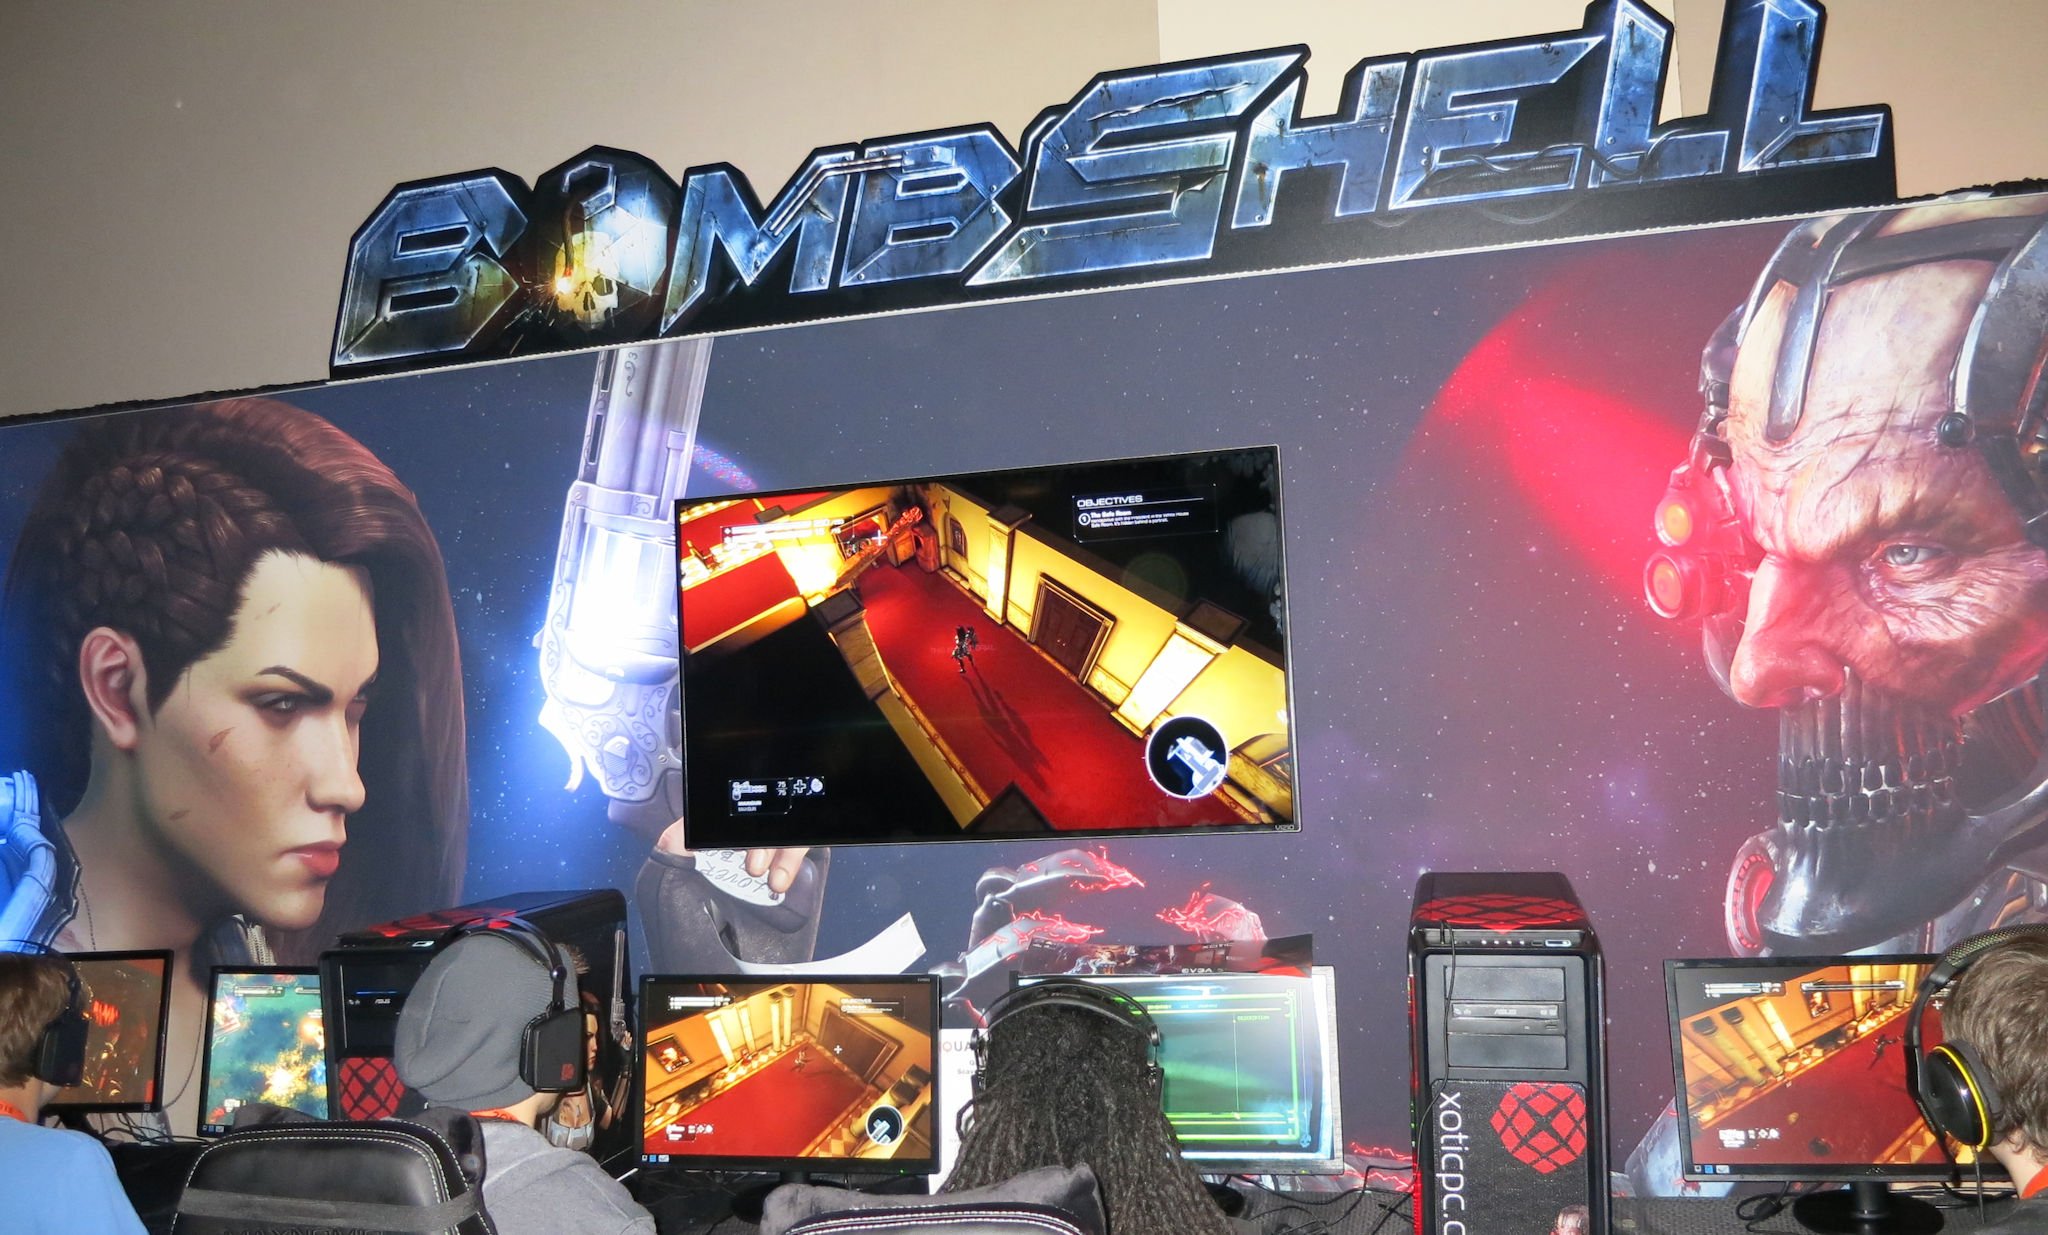 Hands-on with Bombshell, the next game from 3D Realms QuakeCon 2015